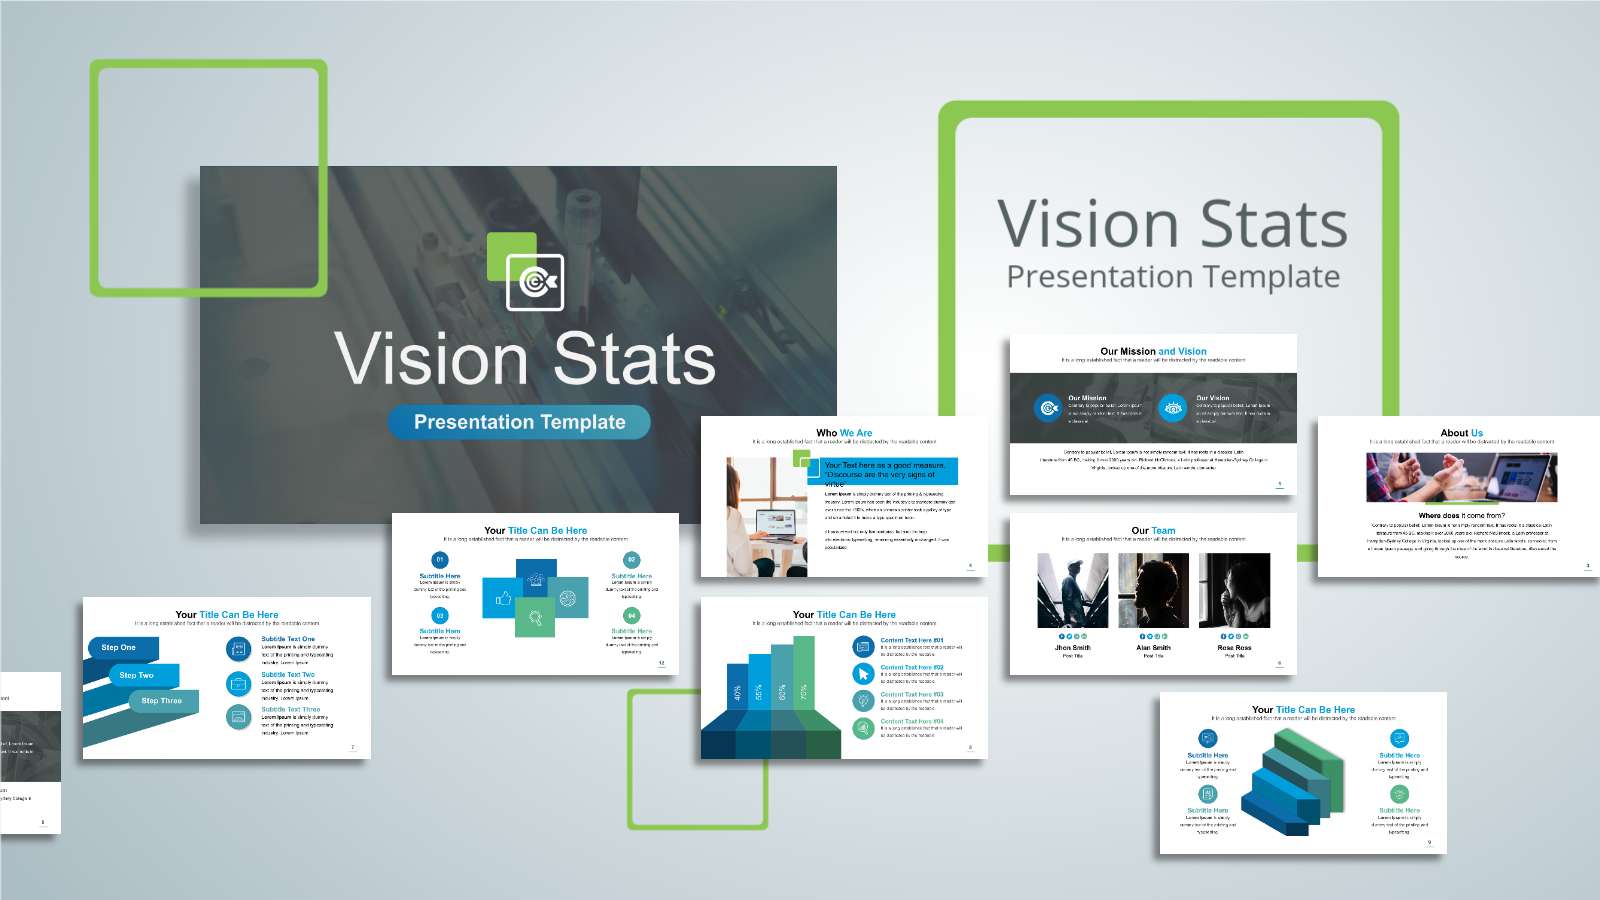 Vision Stats | A PowerPoint Template from PresenterMedia.com